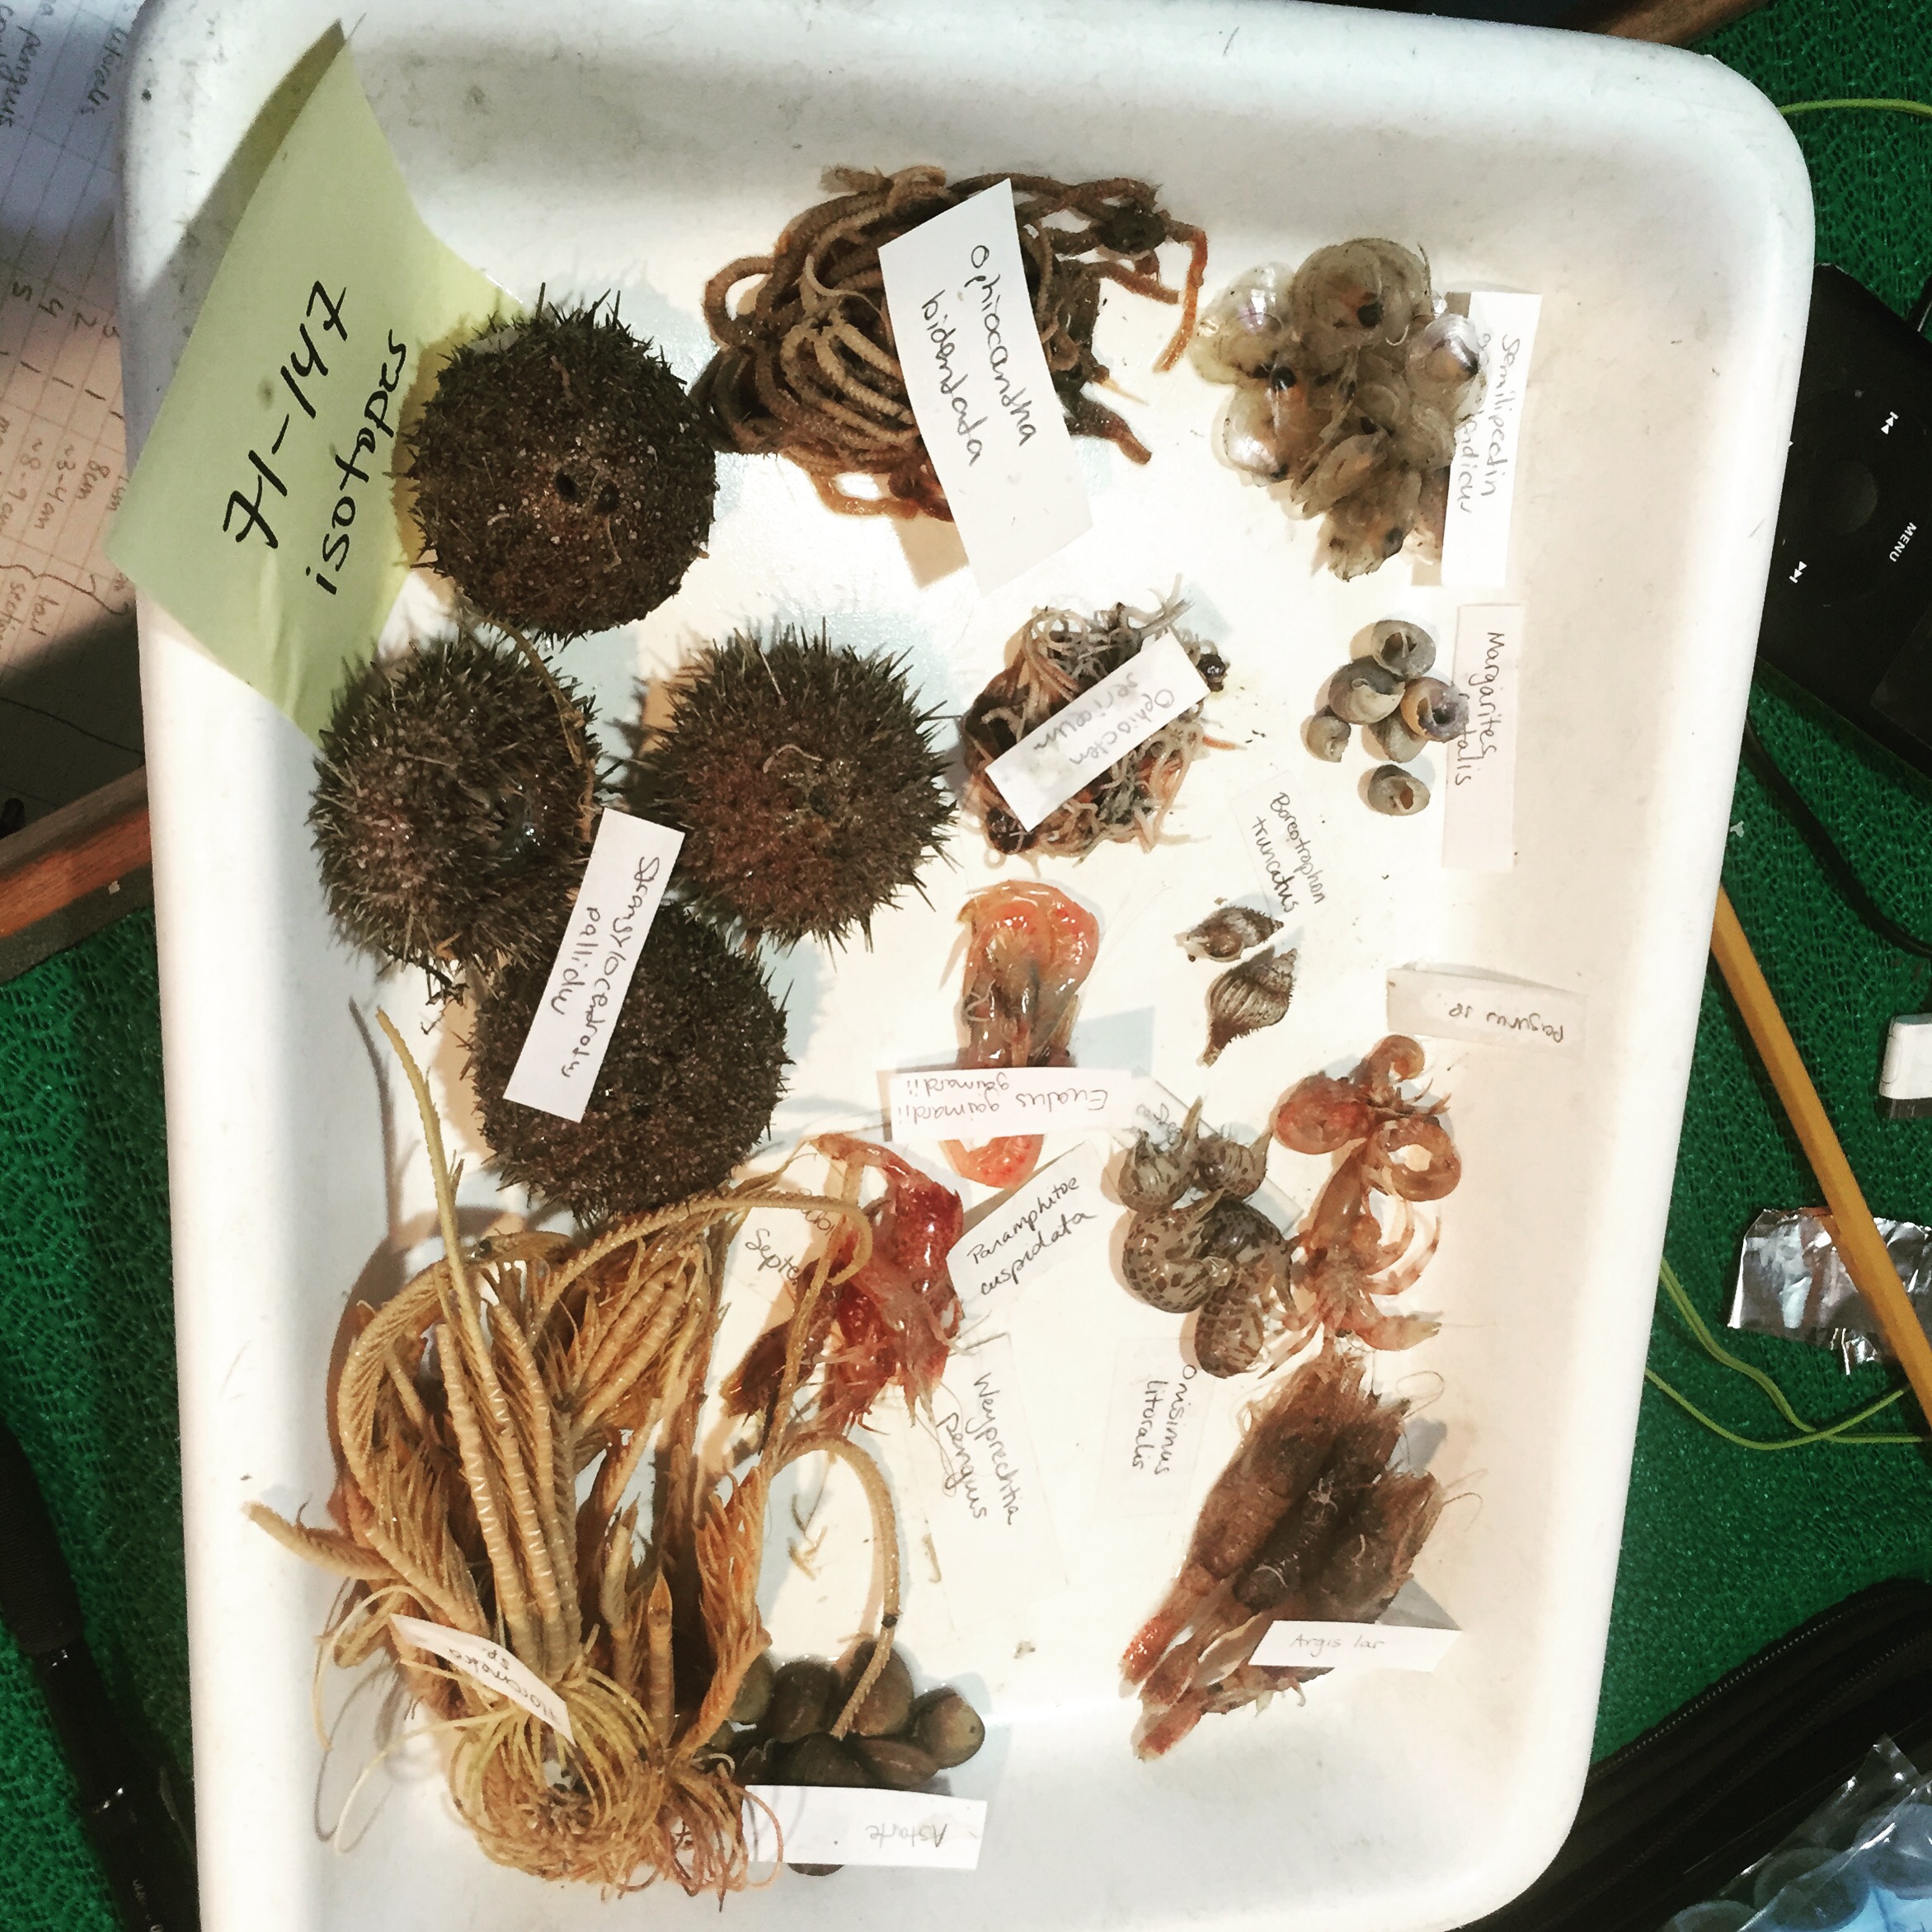 Carrie Harris 2015 sorted and labeled tray of critters from the trawl group